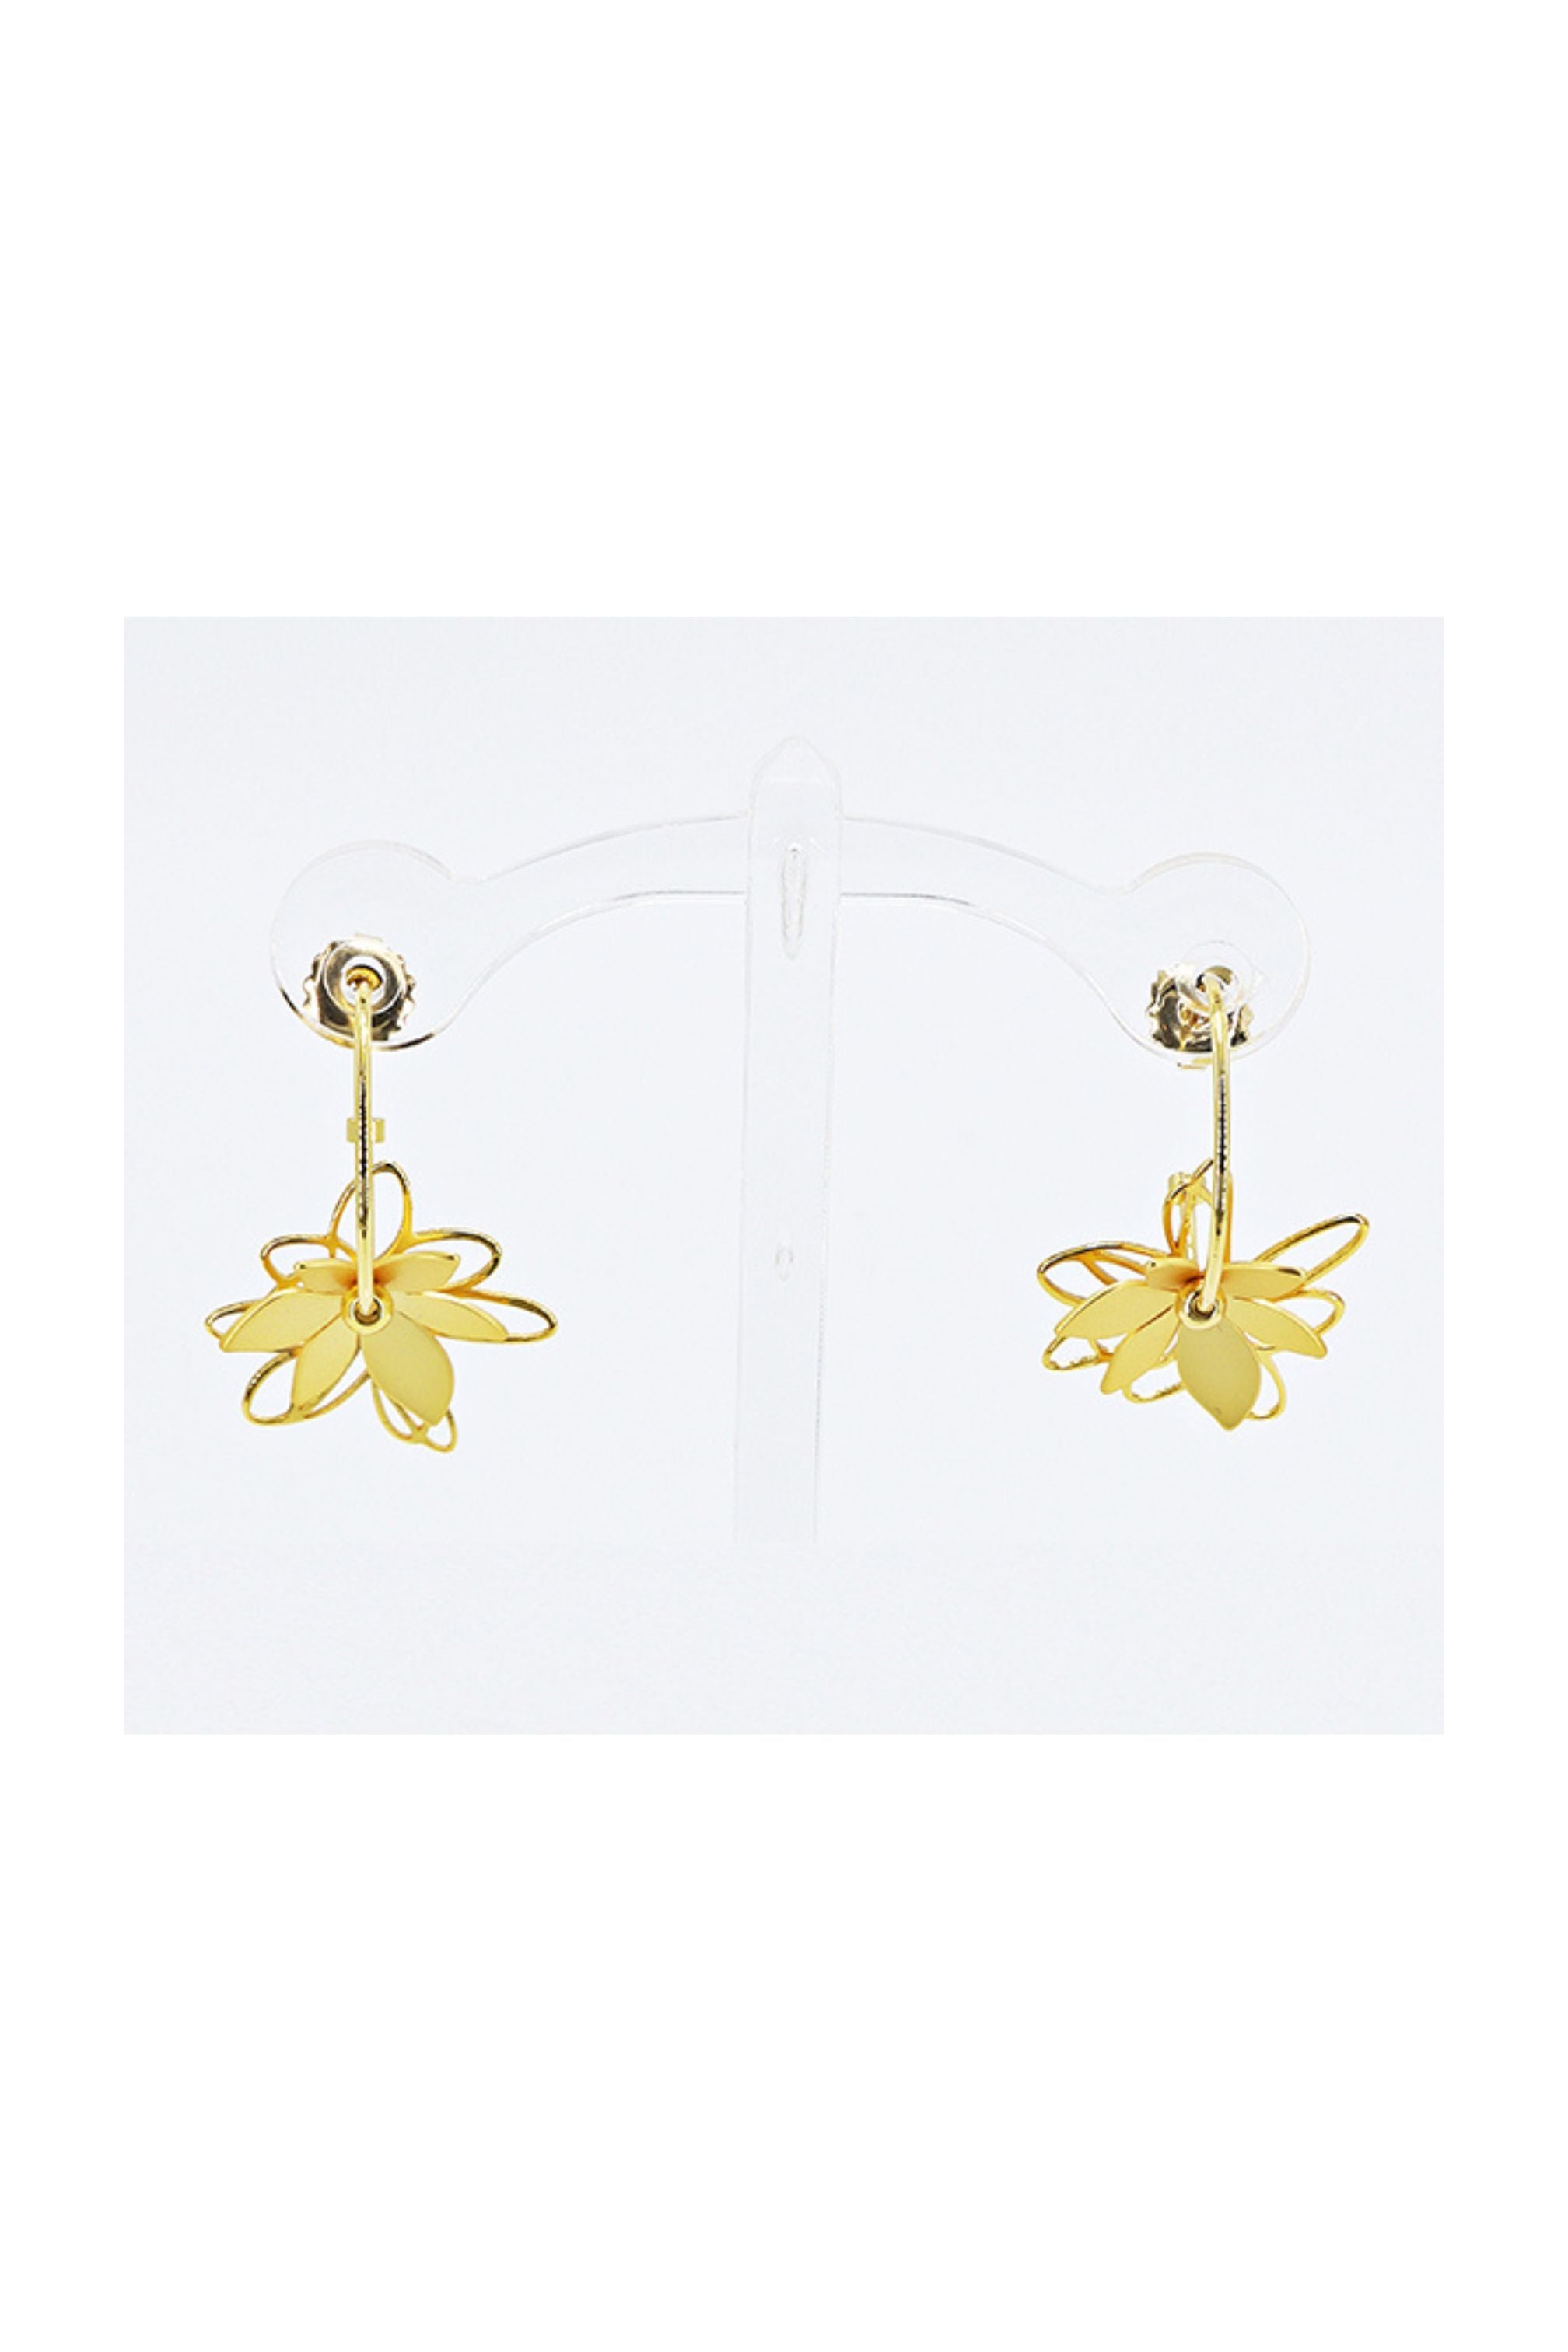 Gold earrings with layered floral design